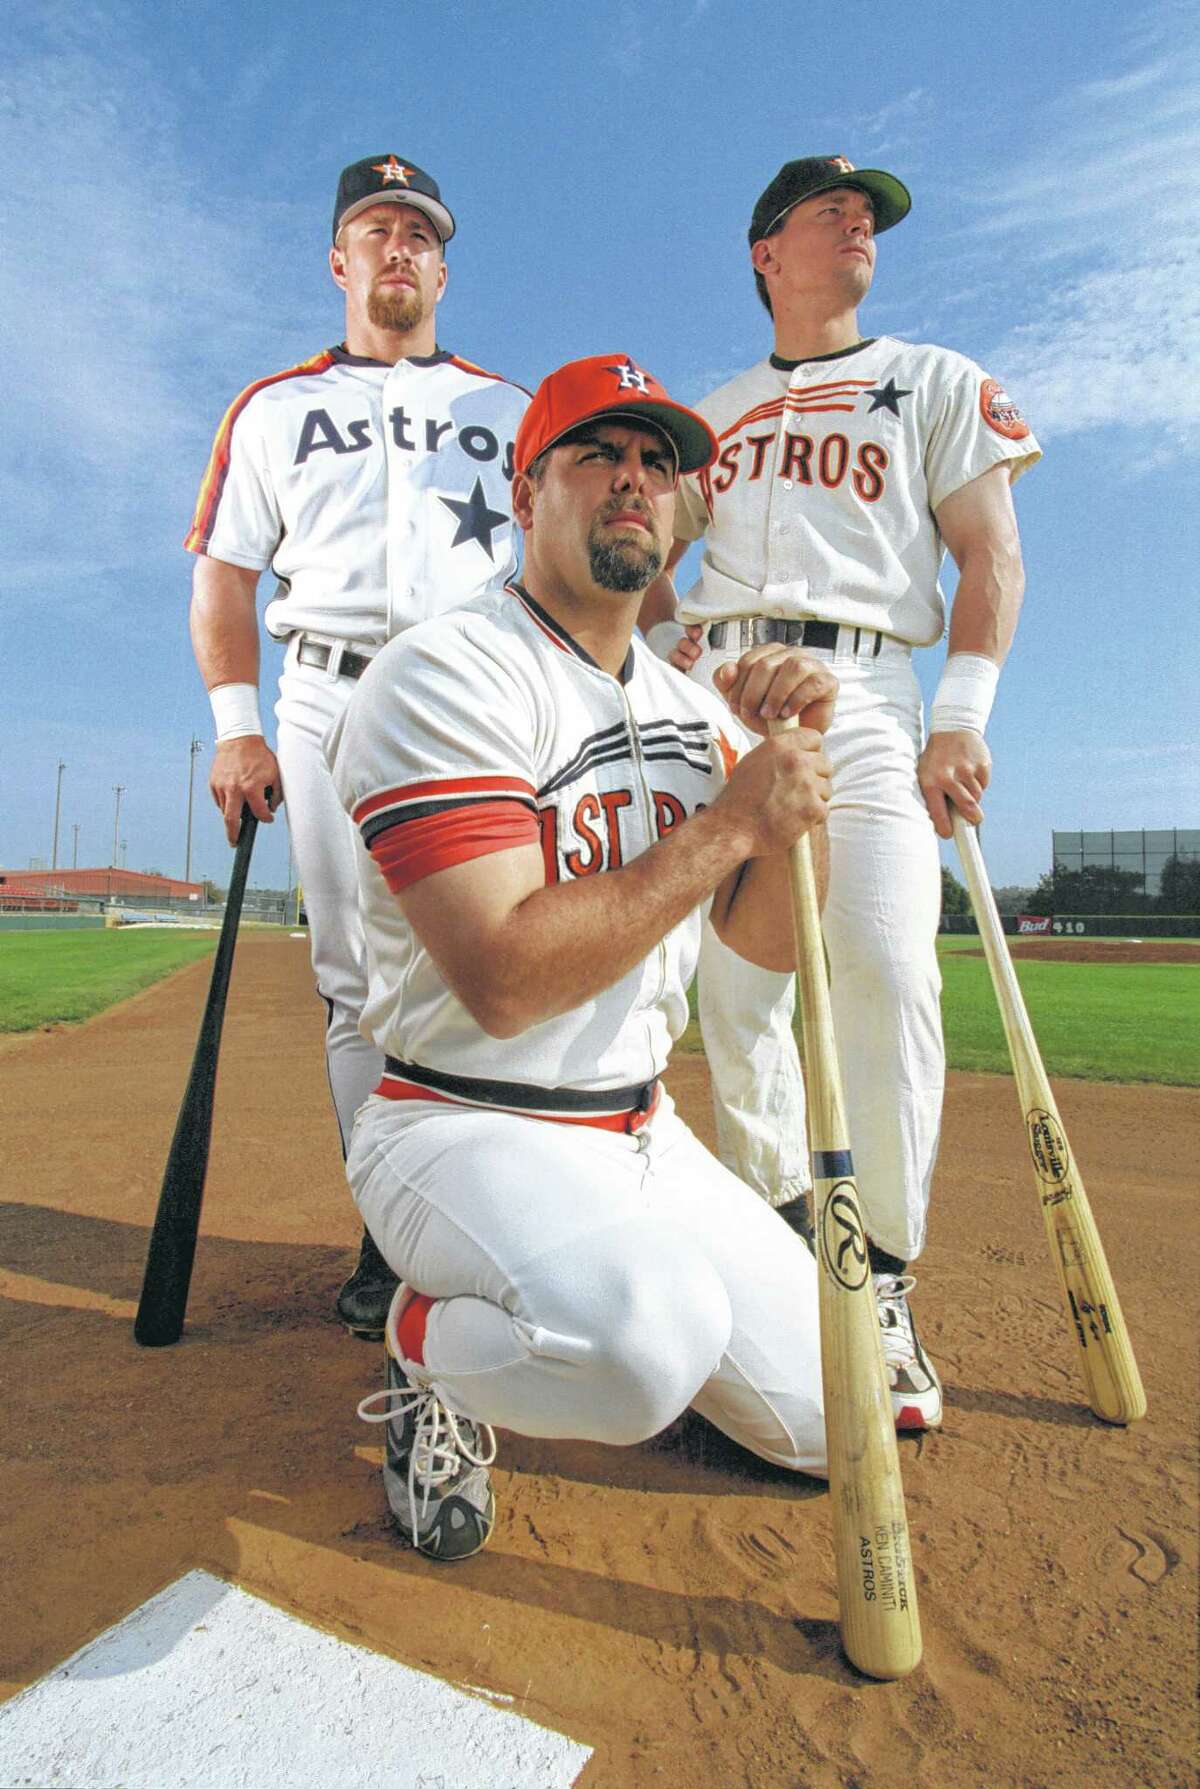 The Long-Lost Story Behind The Astros' Famous Rainbow Uniforms